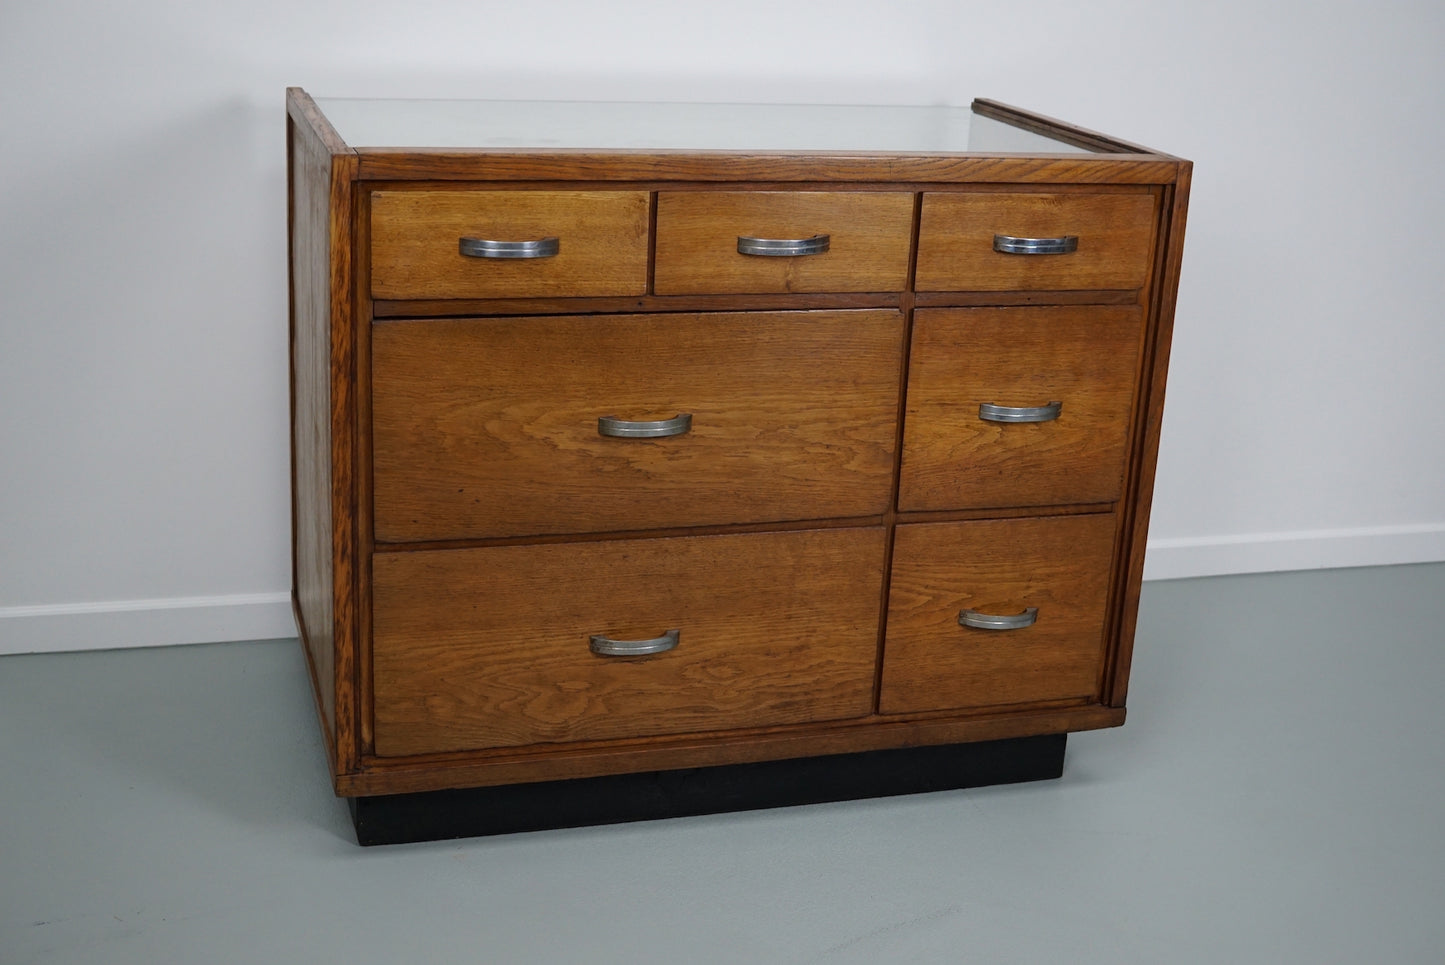 Vintage French Oak Haberdashery Cabinet or Shop Counter, 1950s